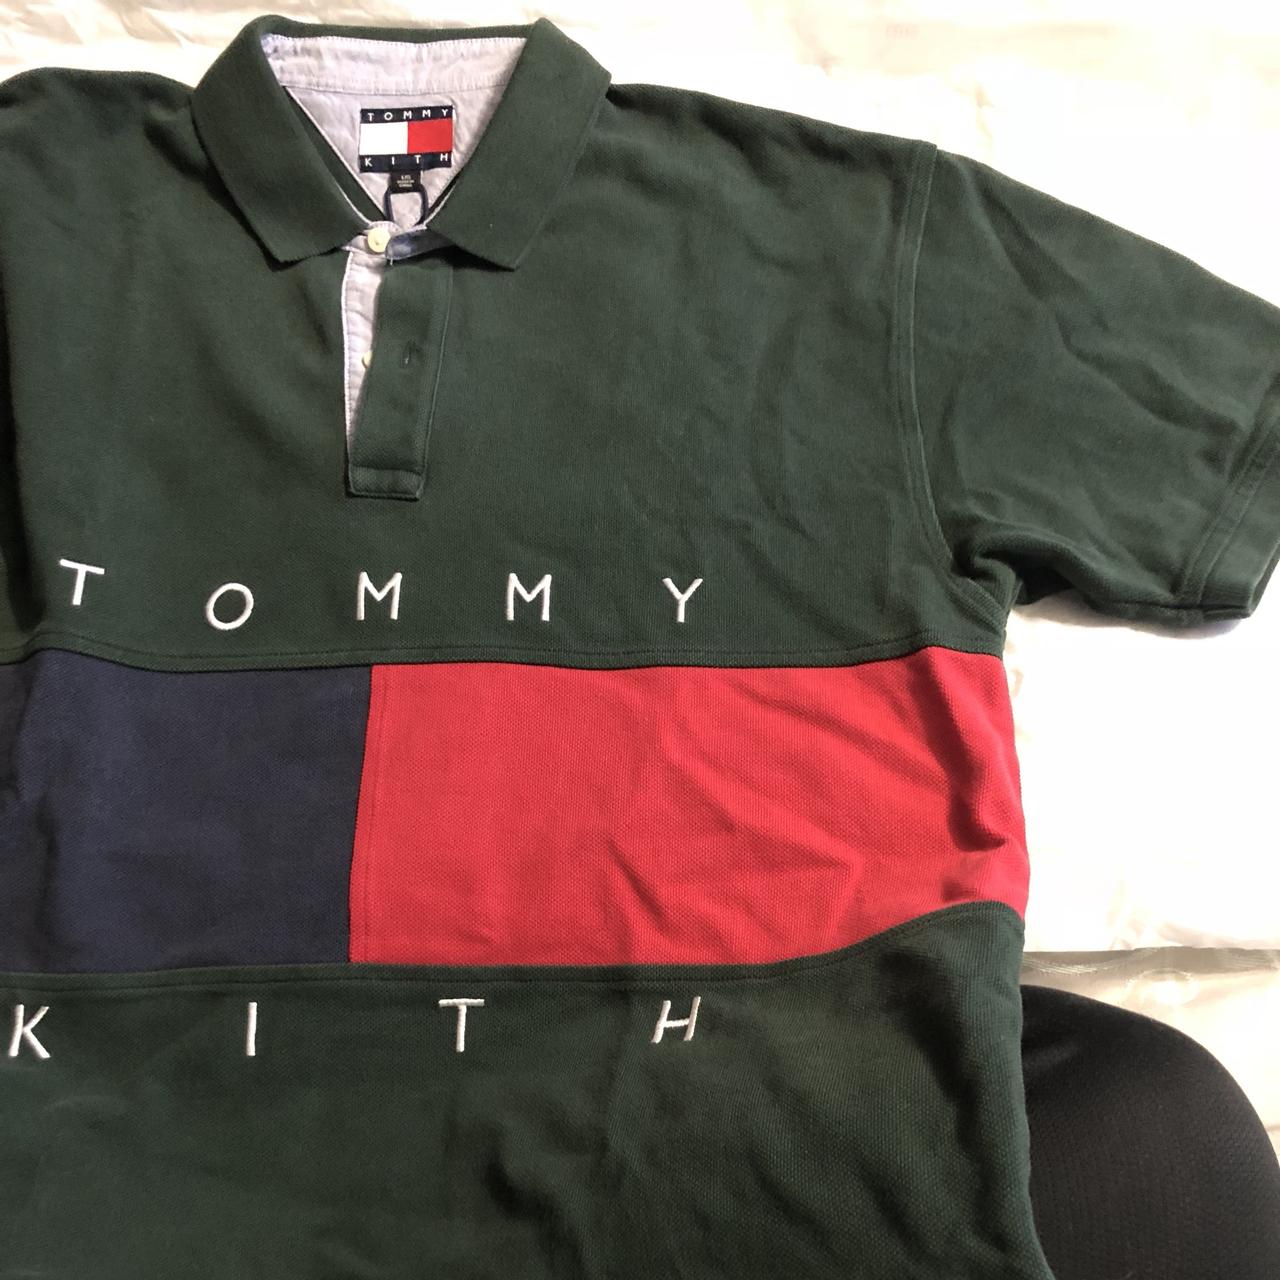 TOMMY HILFIGER x KITH colab. New with tags, bought - Depop